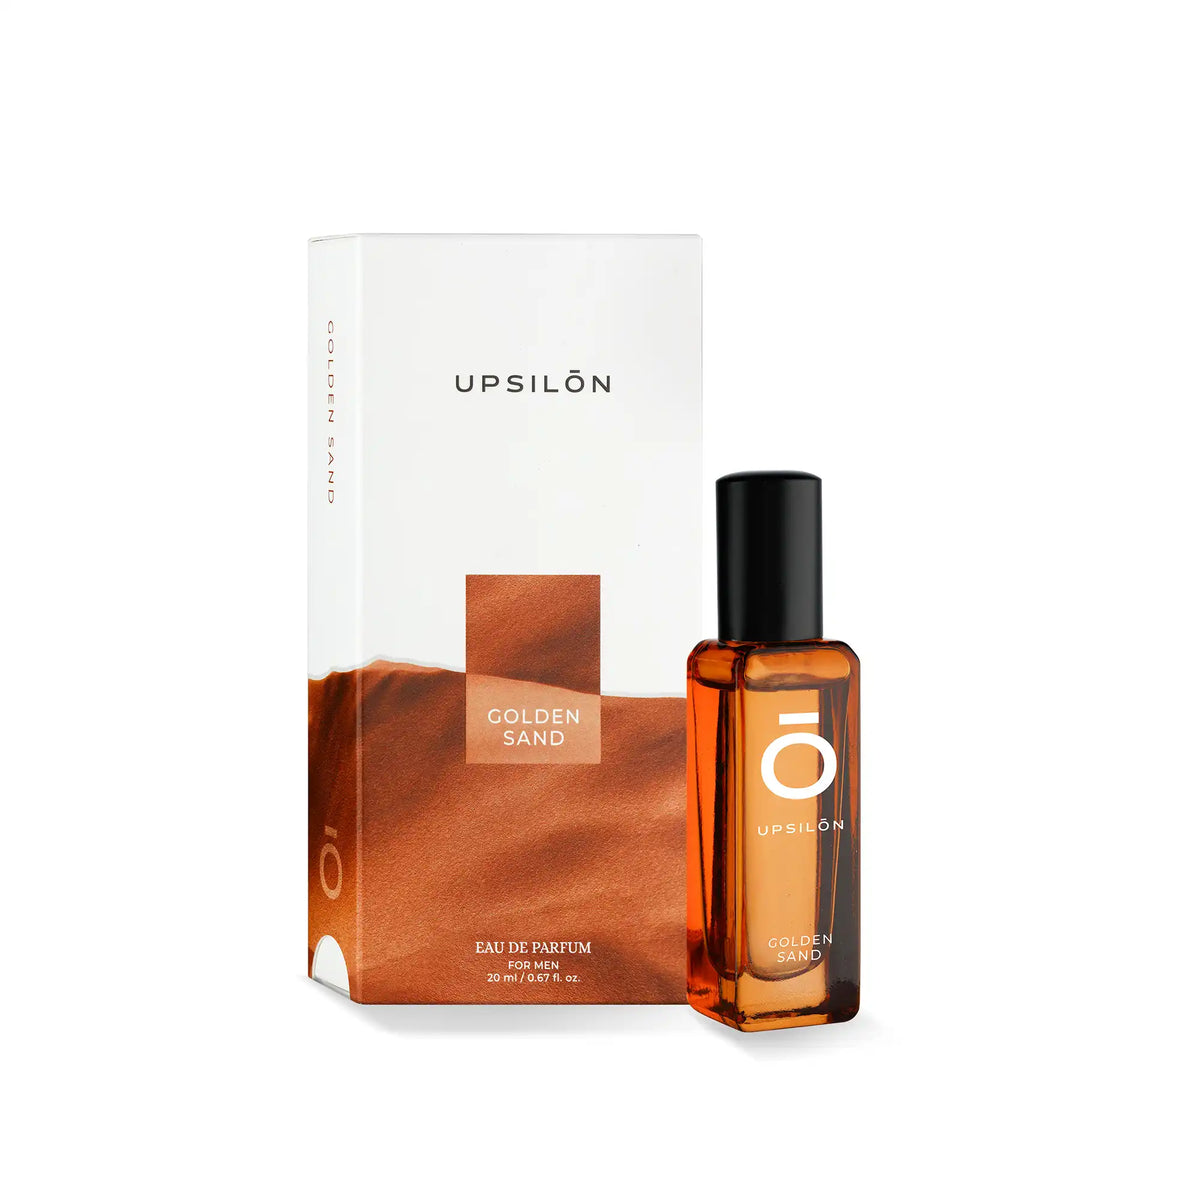 Upsilon Golden Sand Eau de Parfum for Men: A luxurious and long-lasting fragrance with notes of sand, wood, and spice